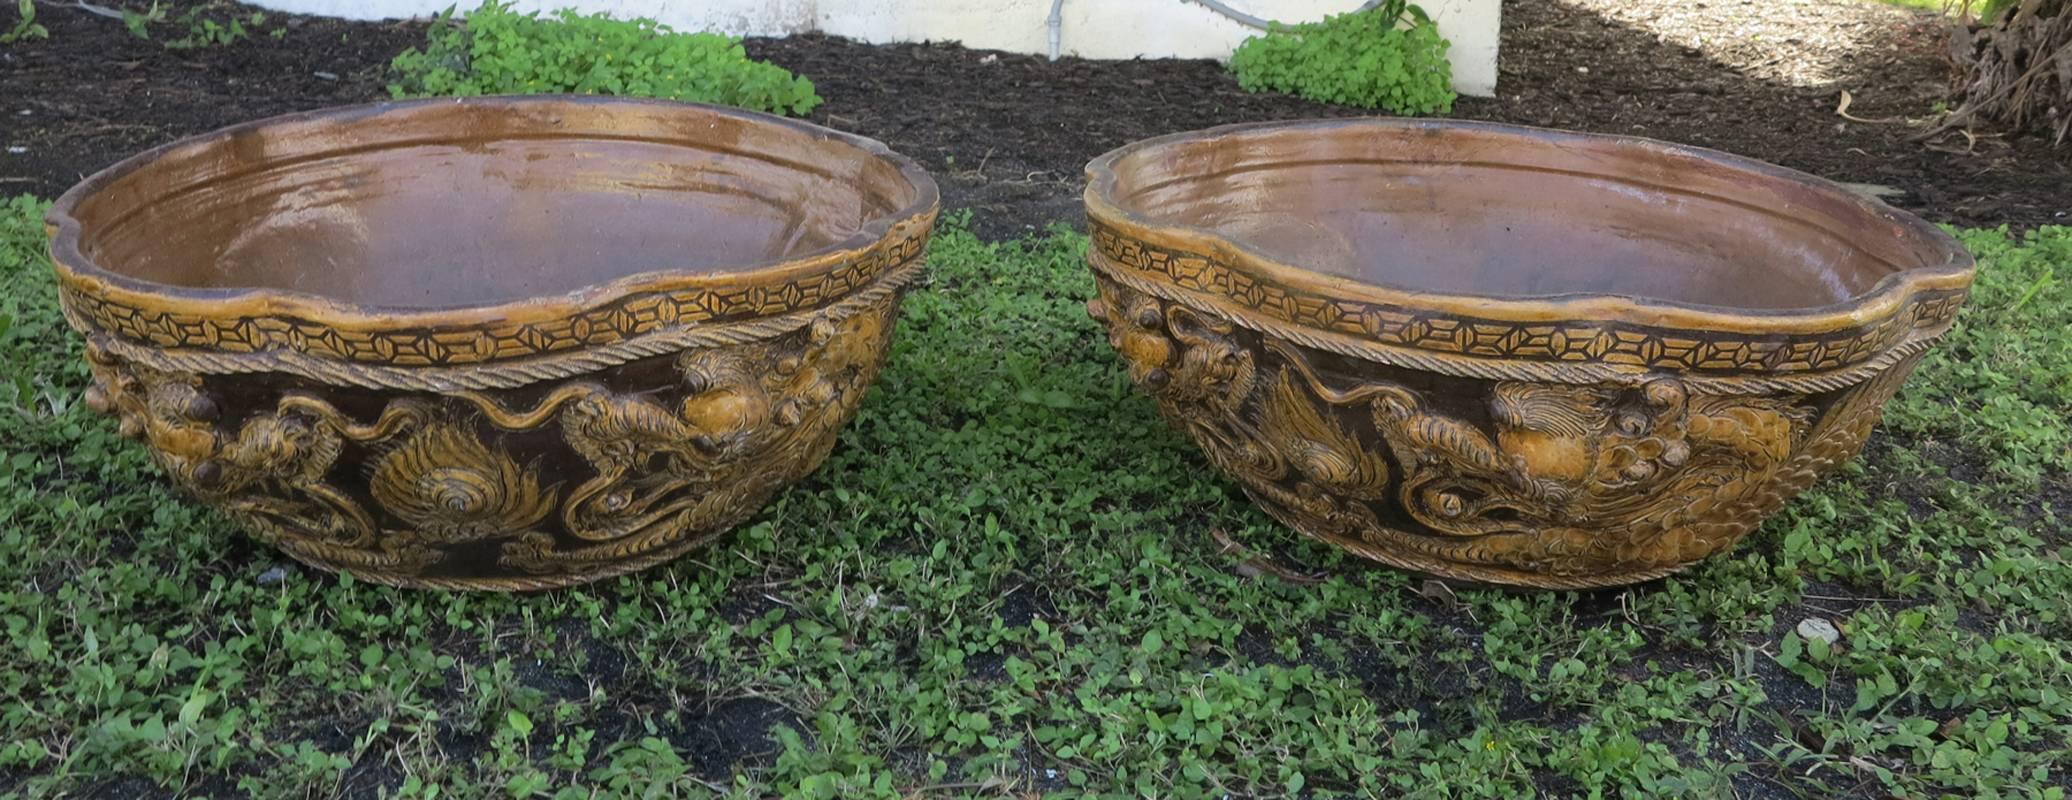 Pair of large antique terracotta planters 19th century probably from England with Chinese styling. Scalloped edges approximately 26 inch diameter. Some minor glaze loses.